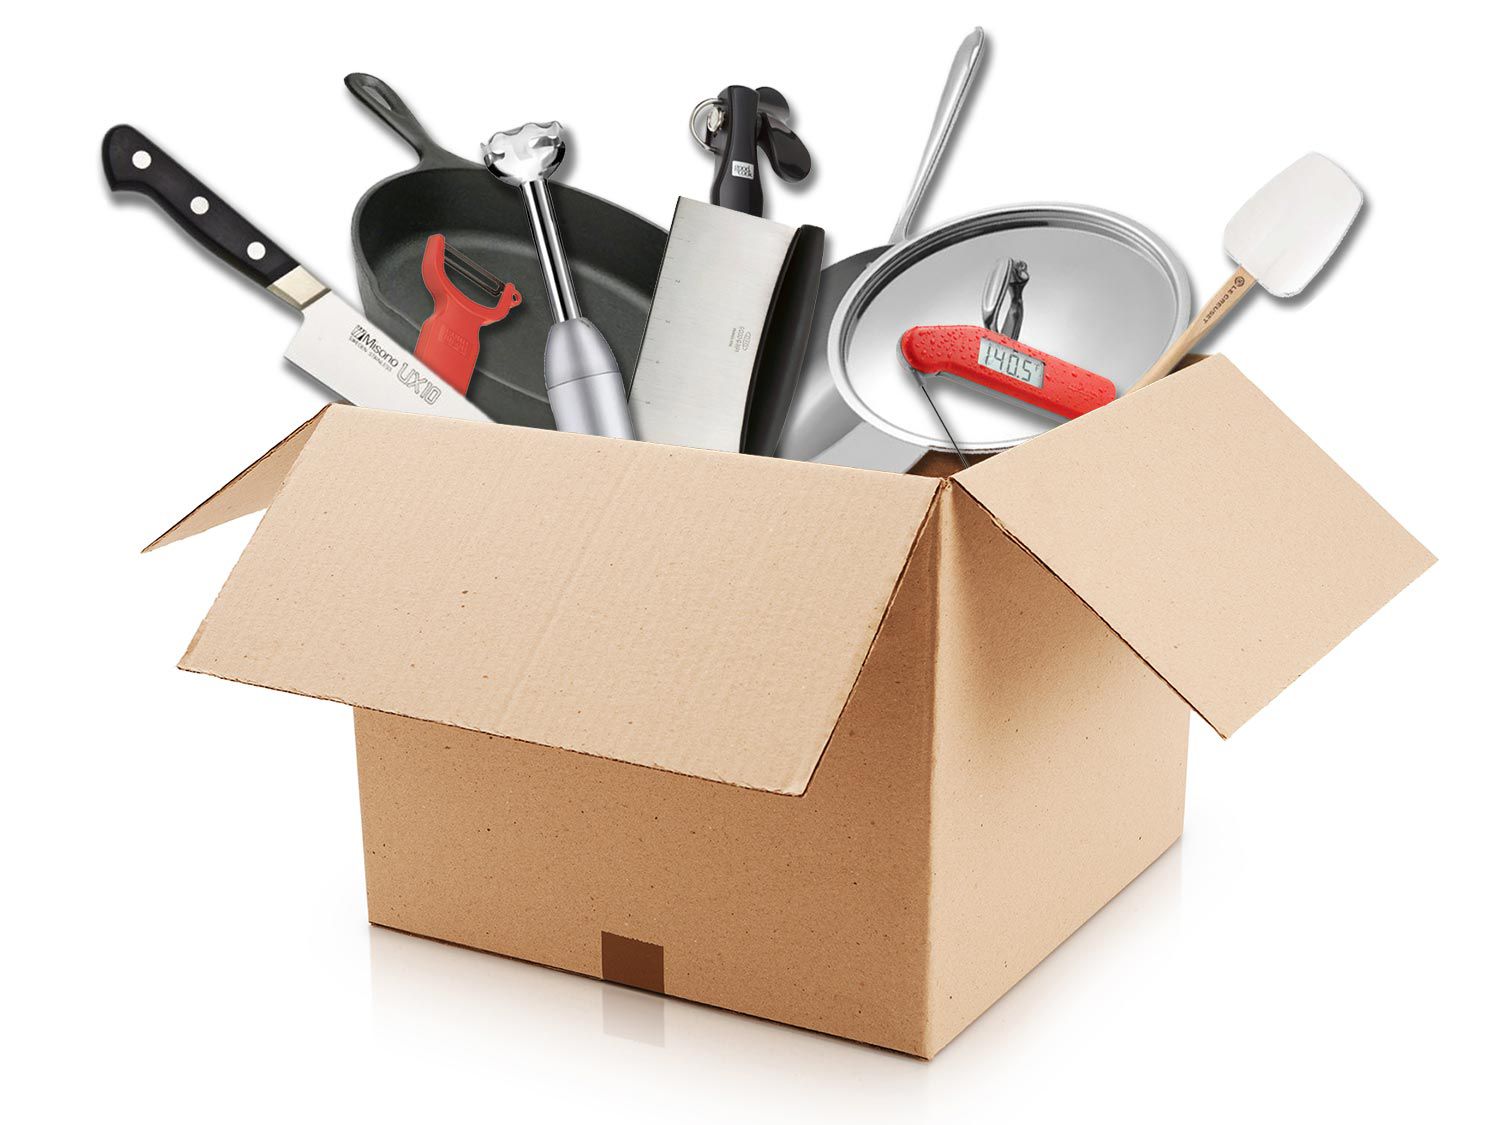 Emergency Cooking Kit: How to Fit All the Tools You Need in One Small Box